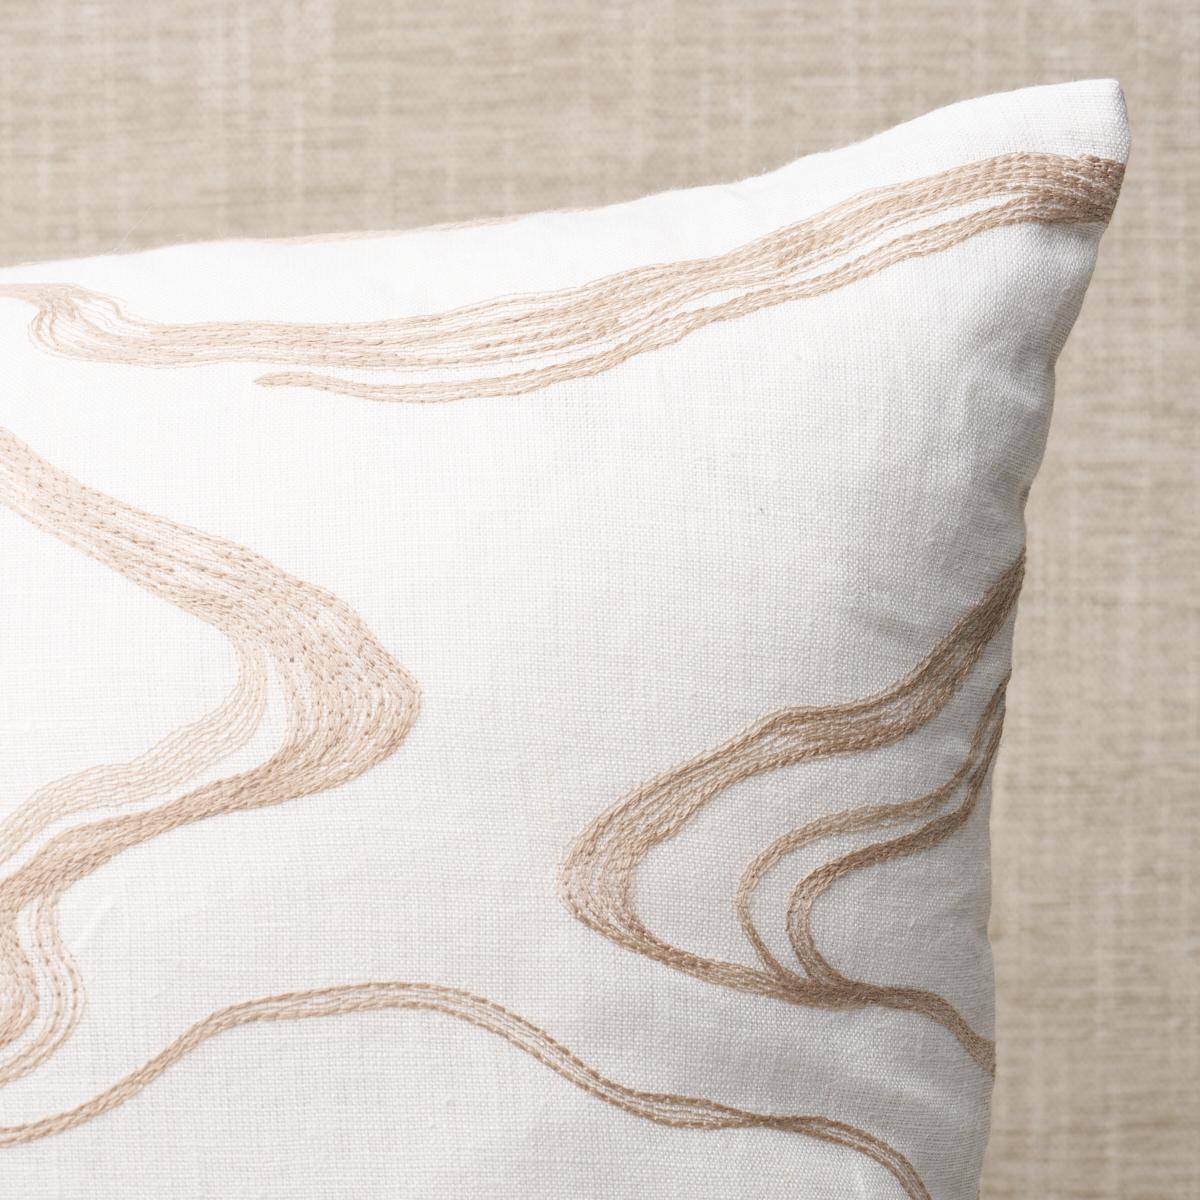 This pillow features Desert Wind Embroidery with a knife edge finish. This exquisite medium-scale fabric is a tonal, textural design with a quiet, understated beauty. Pillow includes a feather/down fill insert and hidden zipper closure.